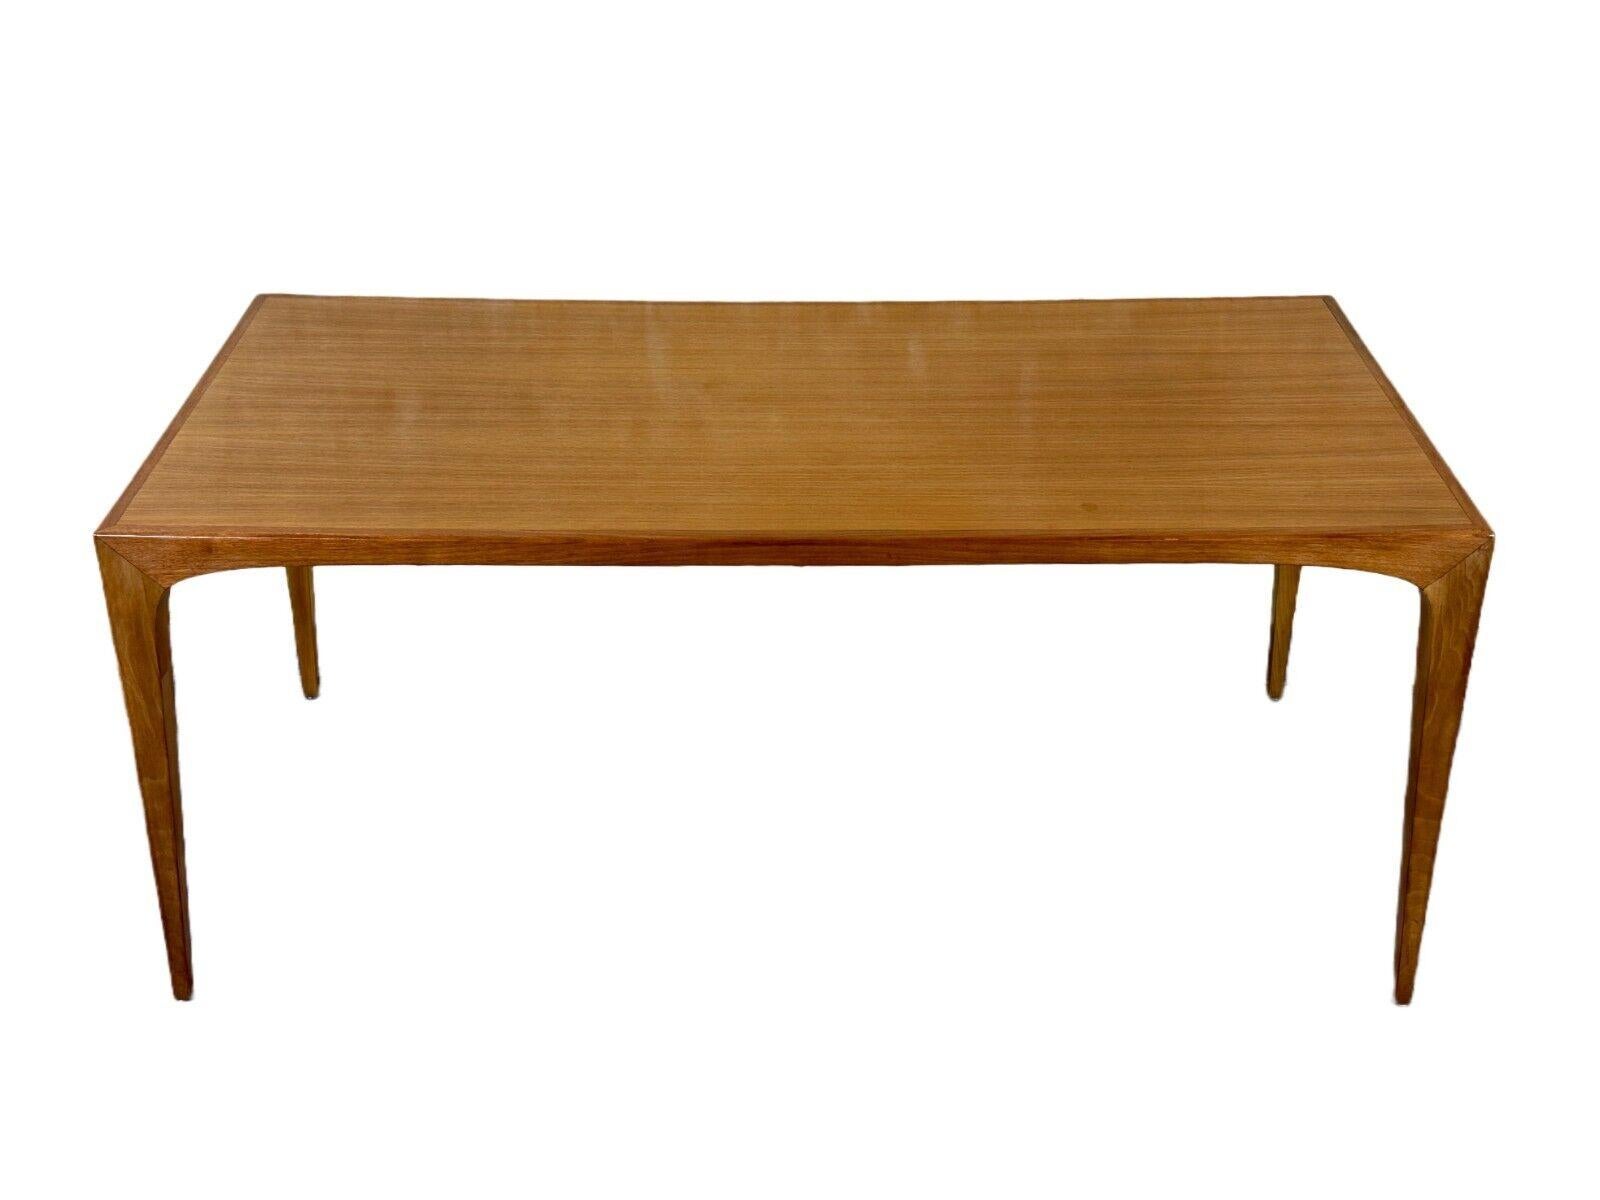 60s 70s teak coffee table side table Danish Modern Design Denmark

Object: coffee table

Manufacturer:

Condition: good

Age: around 1960-1970

Dimensions:

Width = 140cm
Depth = 70cm
Height = 60.5cm

Material: teak

Other notes:

The pictures serve